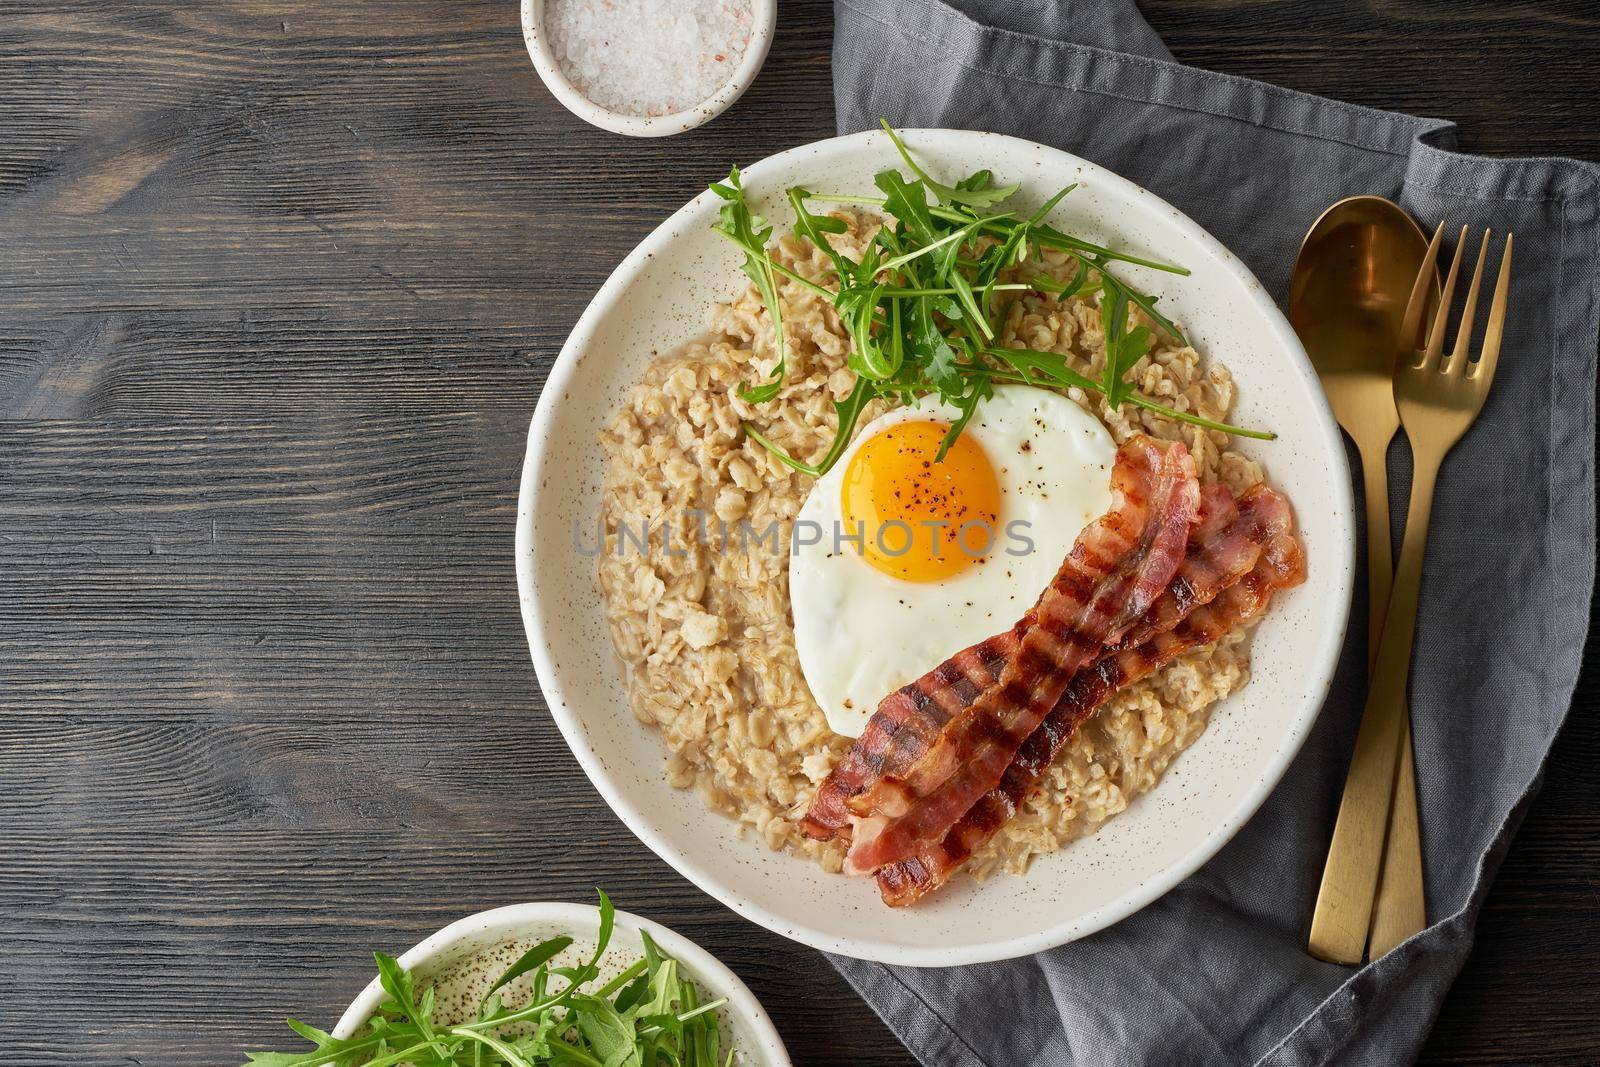 Oatmeal, fried egg and fried bacon. Brutal man sport breakfast. Hearty fat high-calorie breakfast, source of energy. Balance of proteins, fats, carbohydrates. Balanced food. Copy space